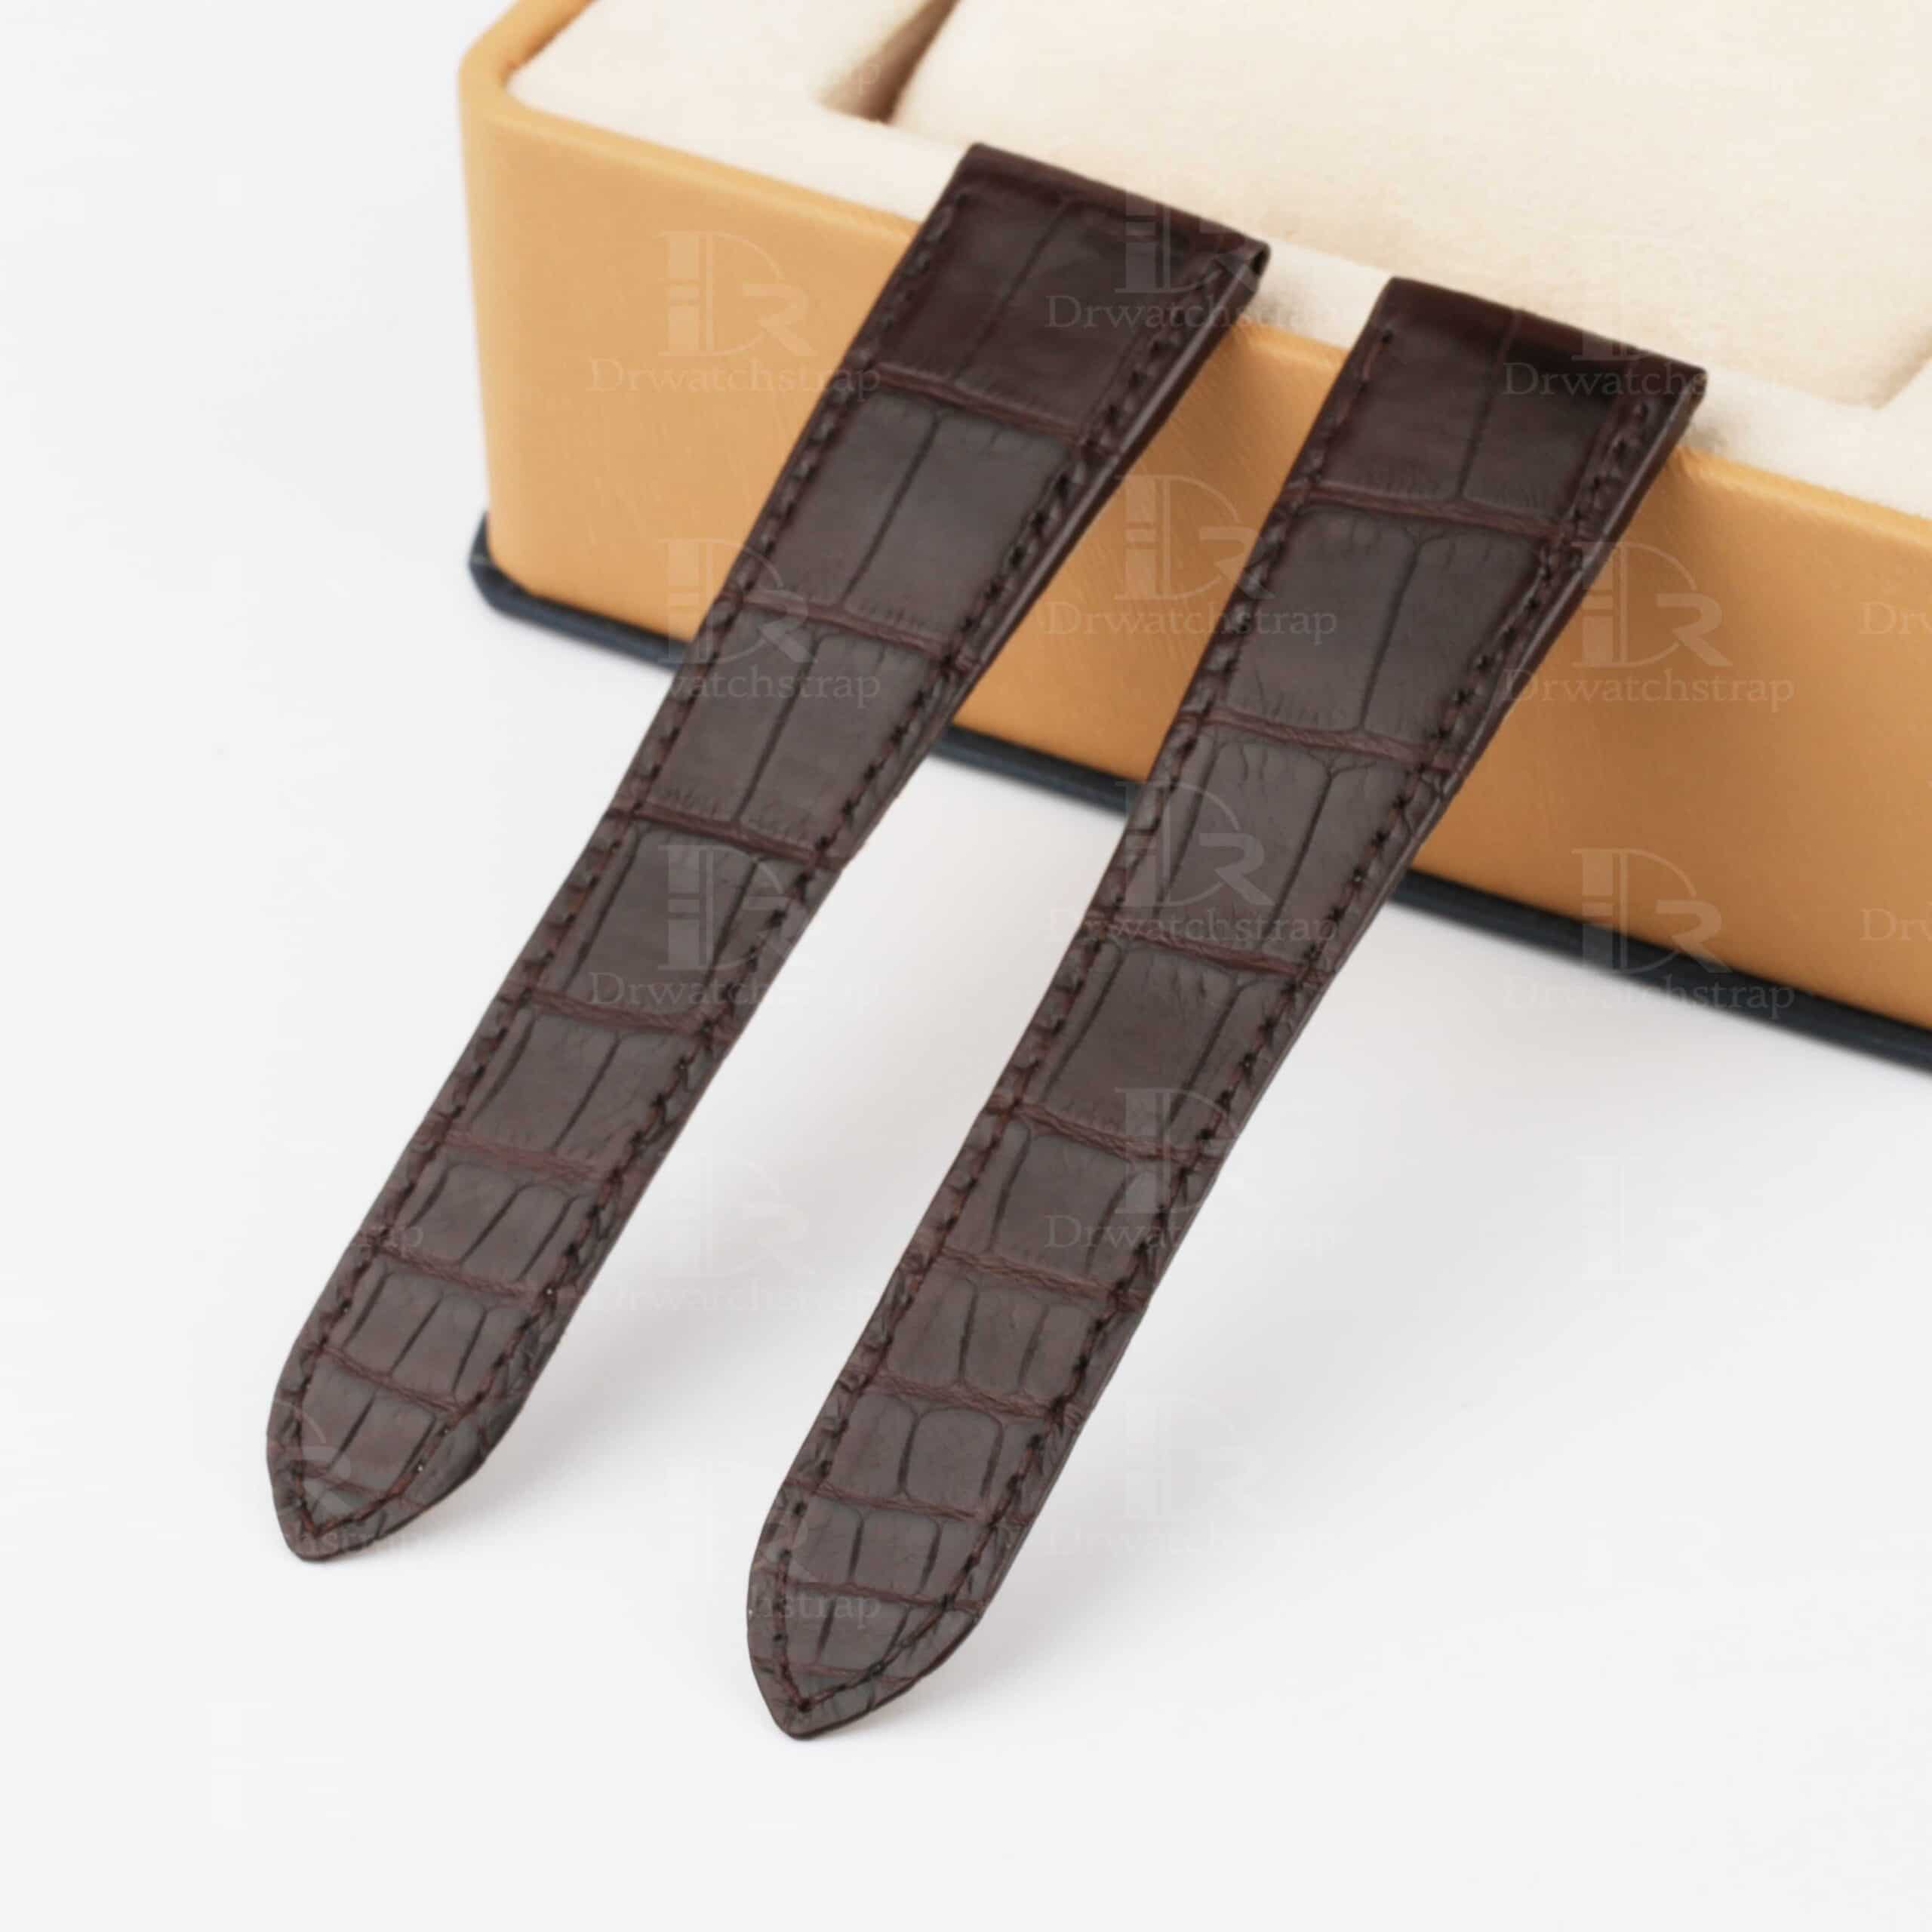 Best quality OEM high-end replacement brown alligator crocodile leather Cartier Calibre watch strap and watch band for Cartier Calibre dive watches online - Aftermarket leather watchbands for Cartier Calibre at a low price